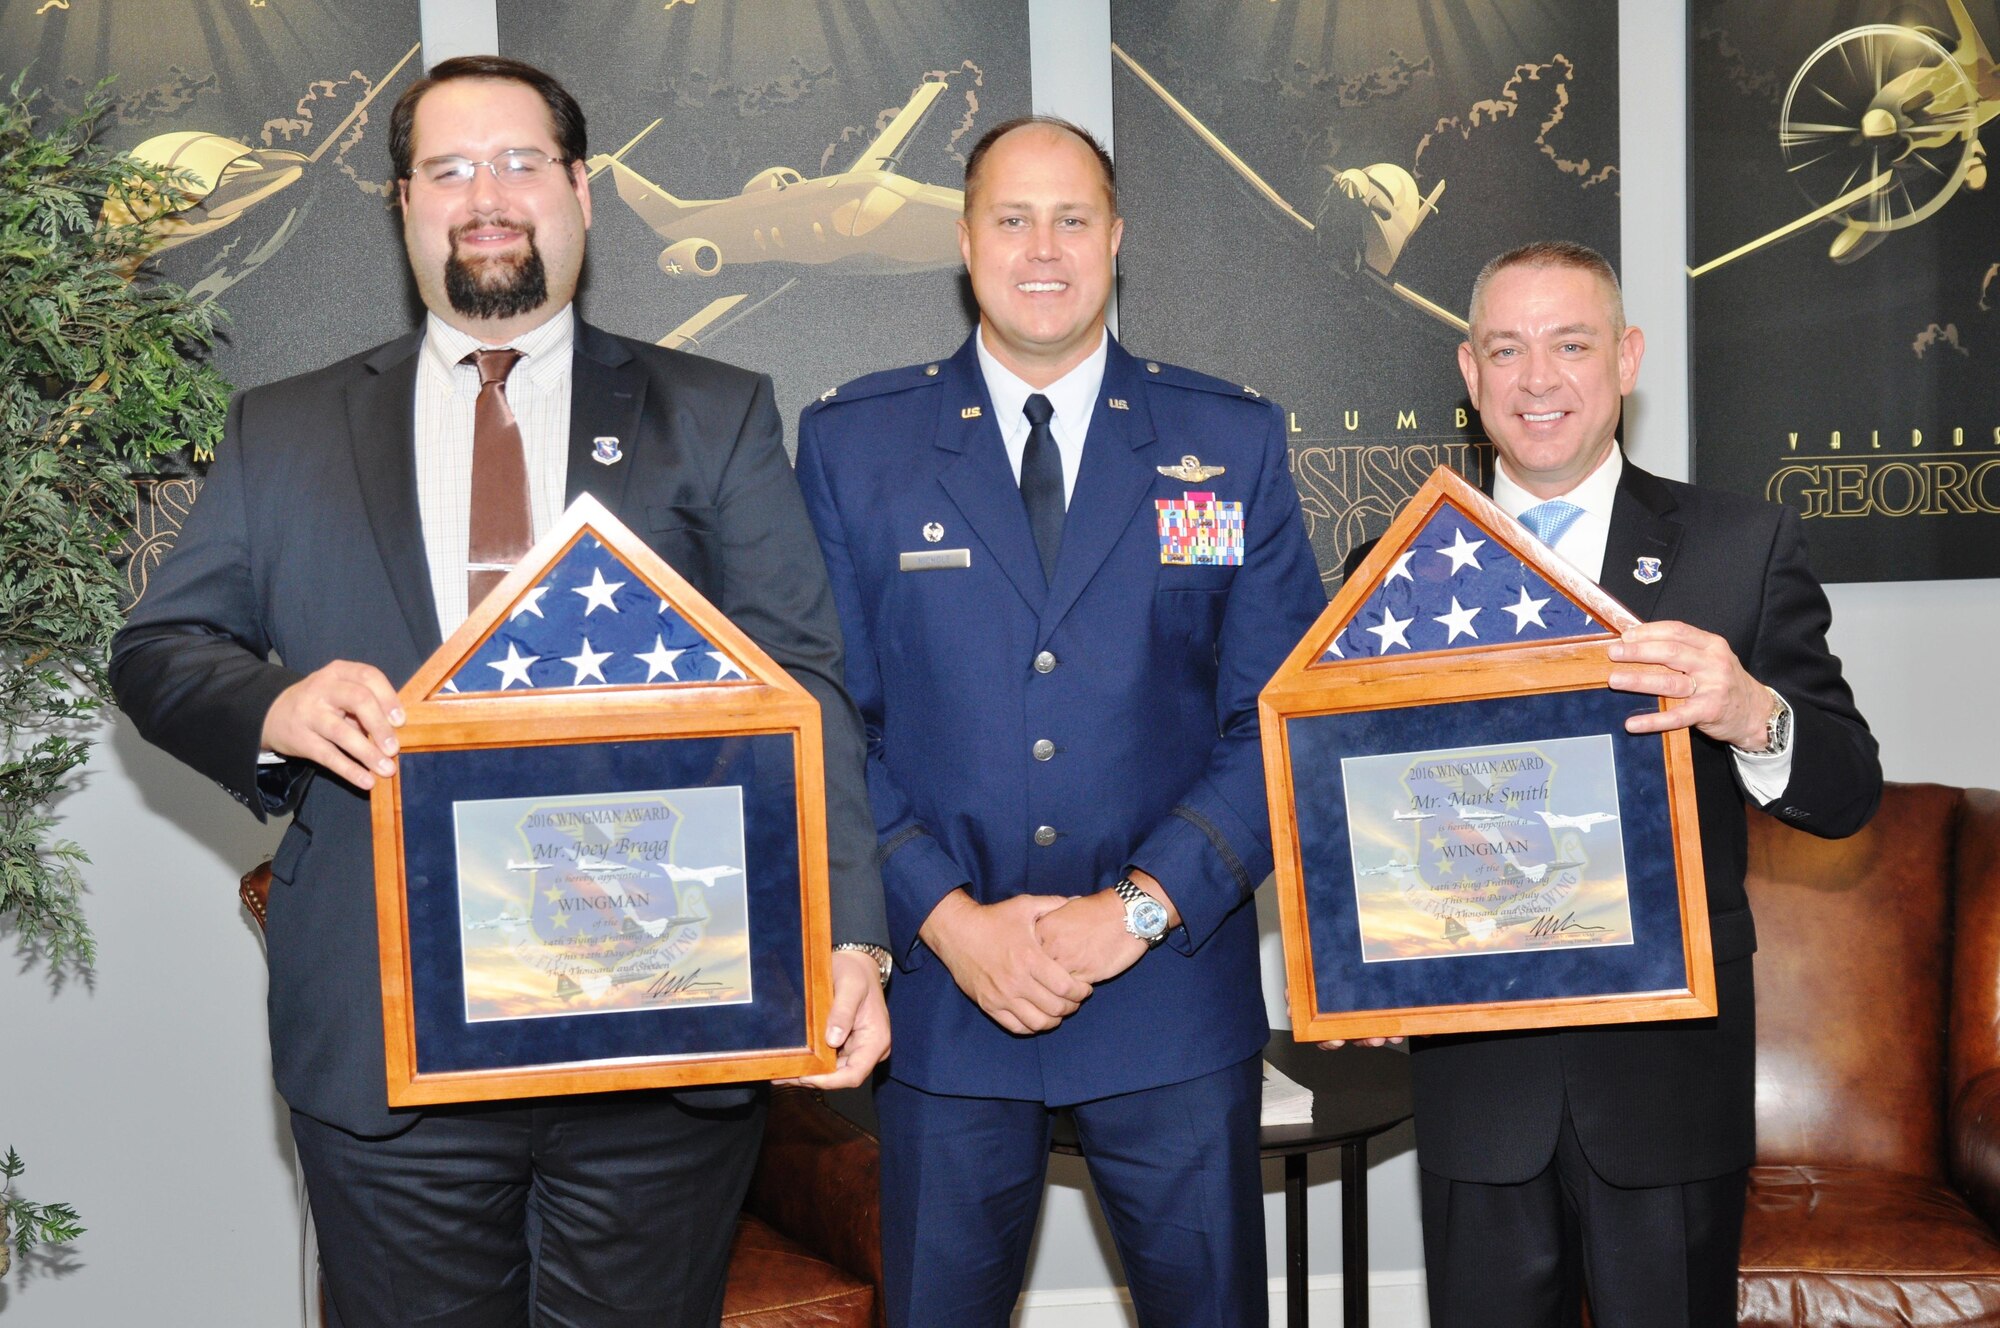 Col. John Nichols, 14th Flying Training Wing Commander, center, stands on July 12 with Joey Bragg, left, and Mark Smith, right, the two newest Columbus Wingmen at the Columbus Club on Columbus Air Force Base, Mississippi. The Columbus Wingman Award is an honorary designation that recognizes outstanding members of the community who have made exceptional contributions to the base. (U.S. Air Force photo/Sonic Johnson)